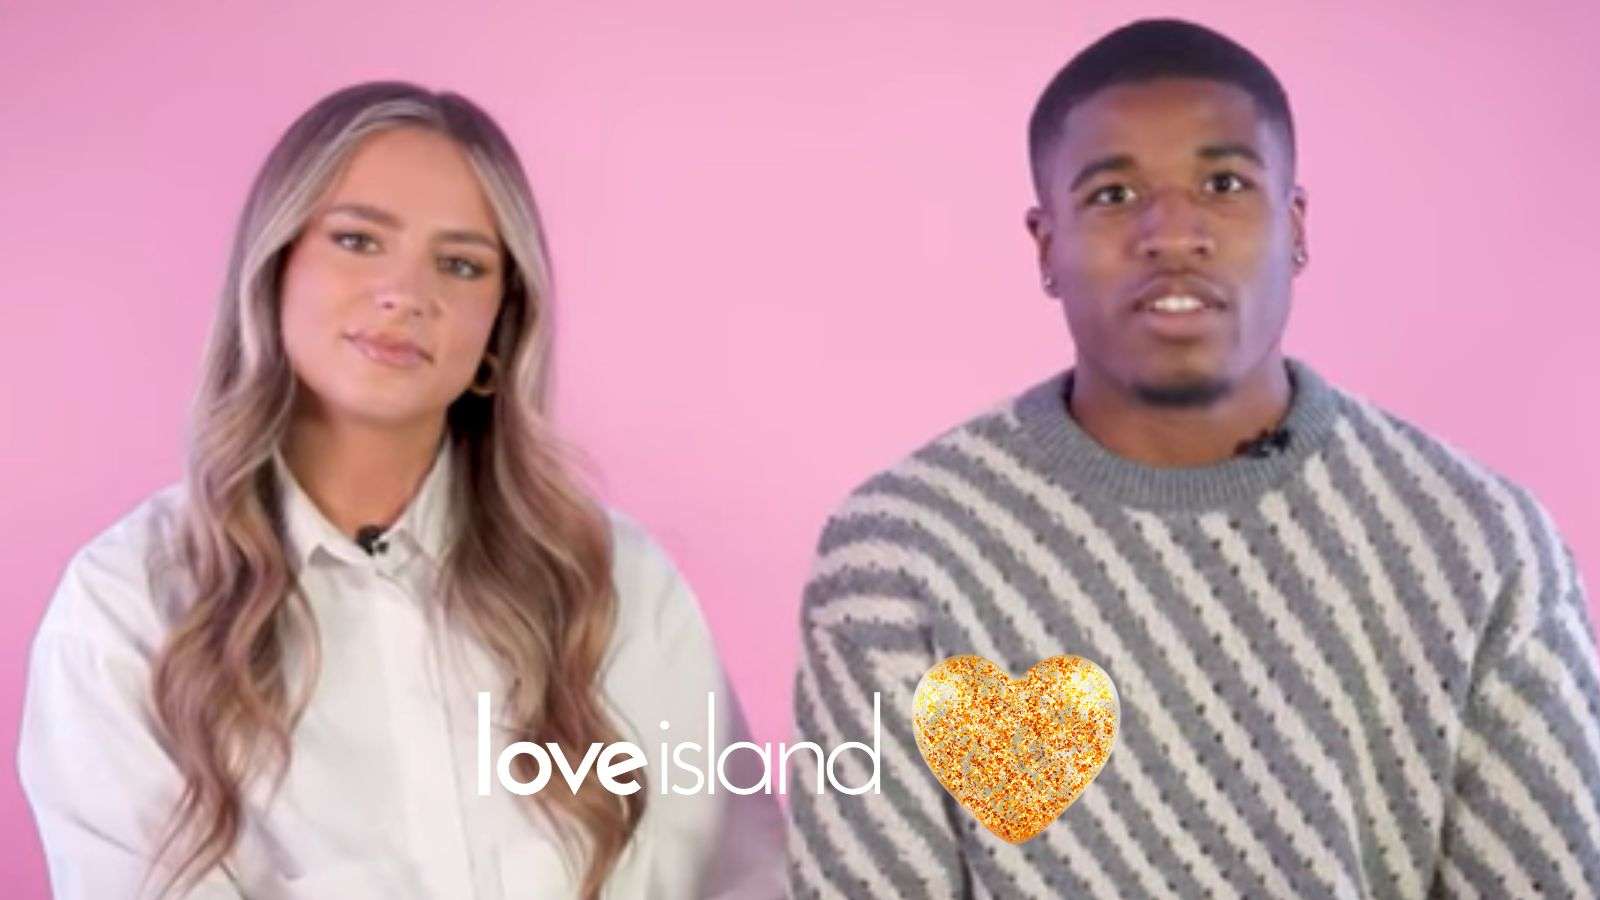 Leah and Montel from Love Island